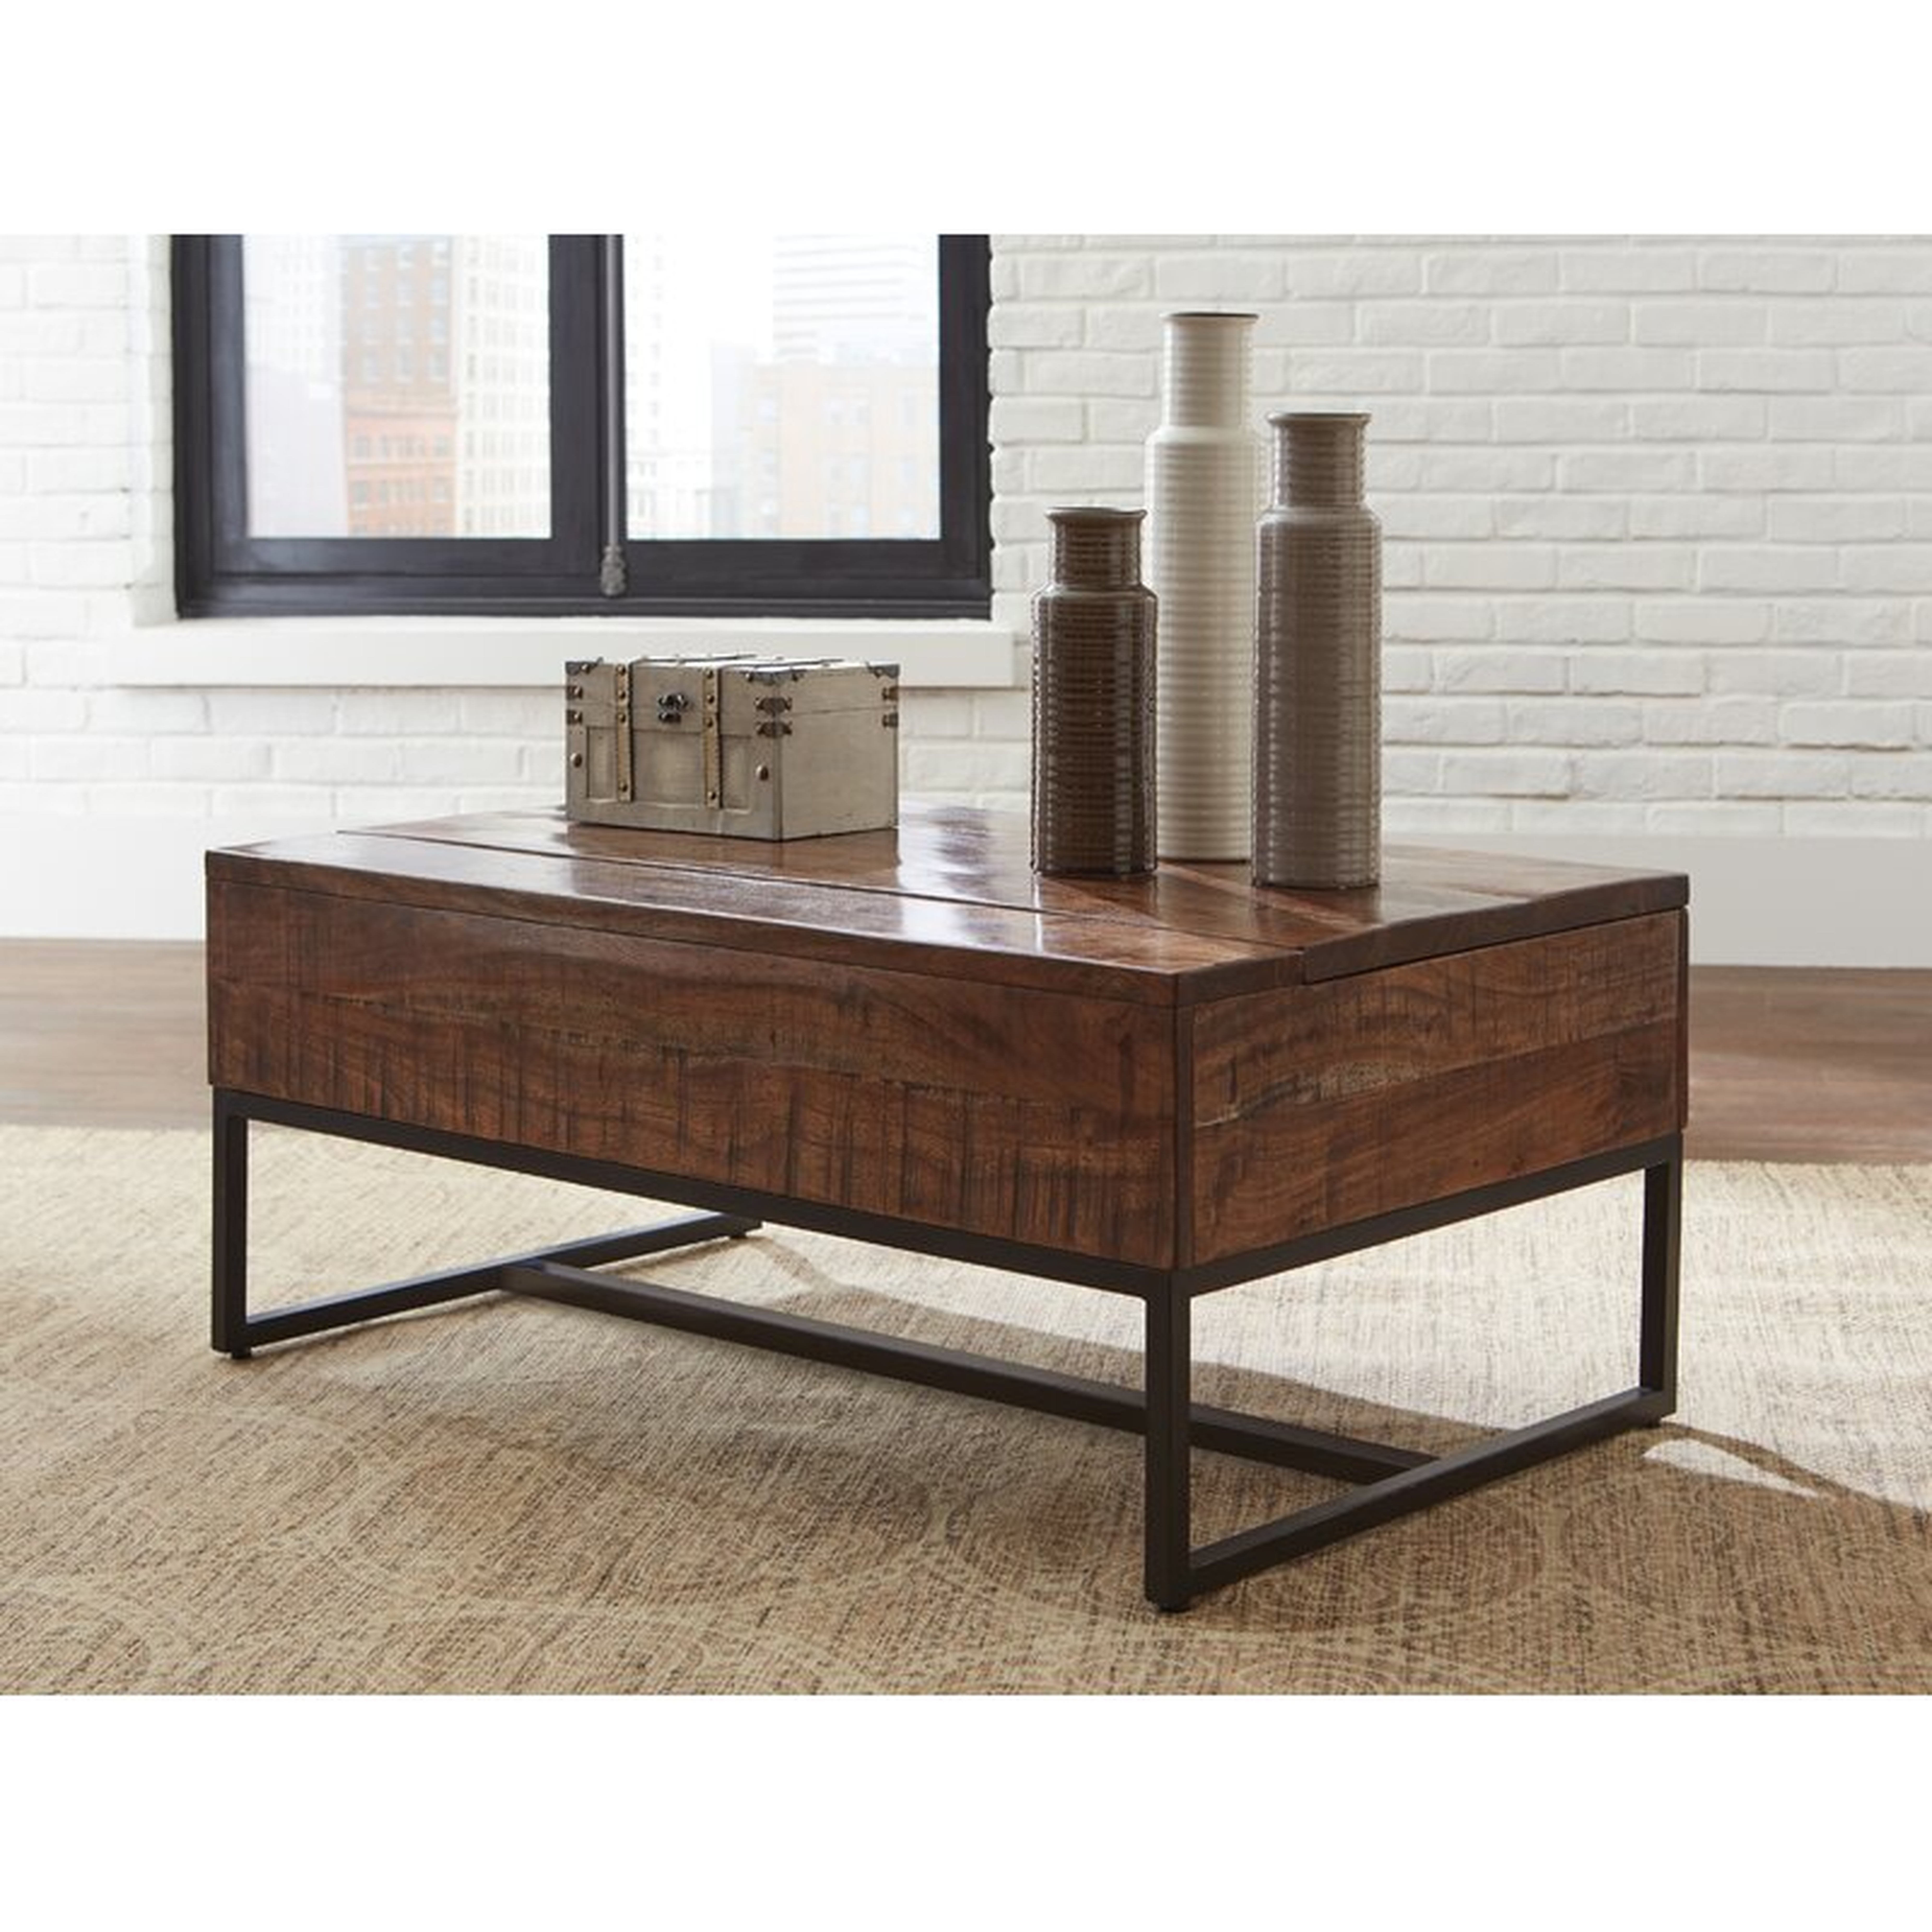 Itzel Lift Top Coffee Table with Storage - Wayfair